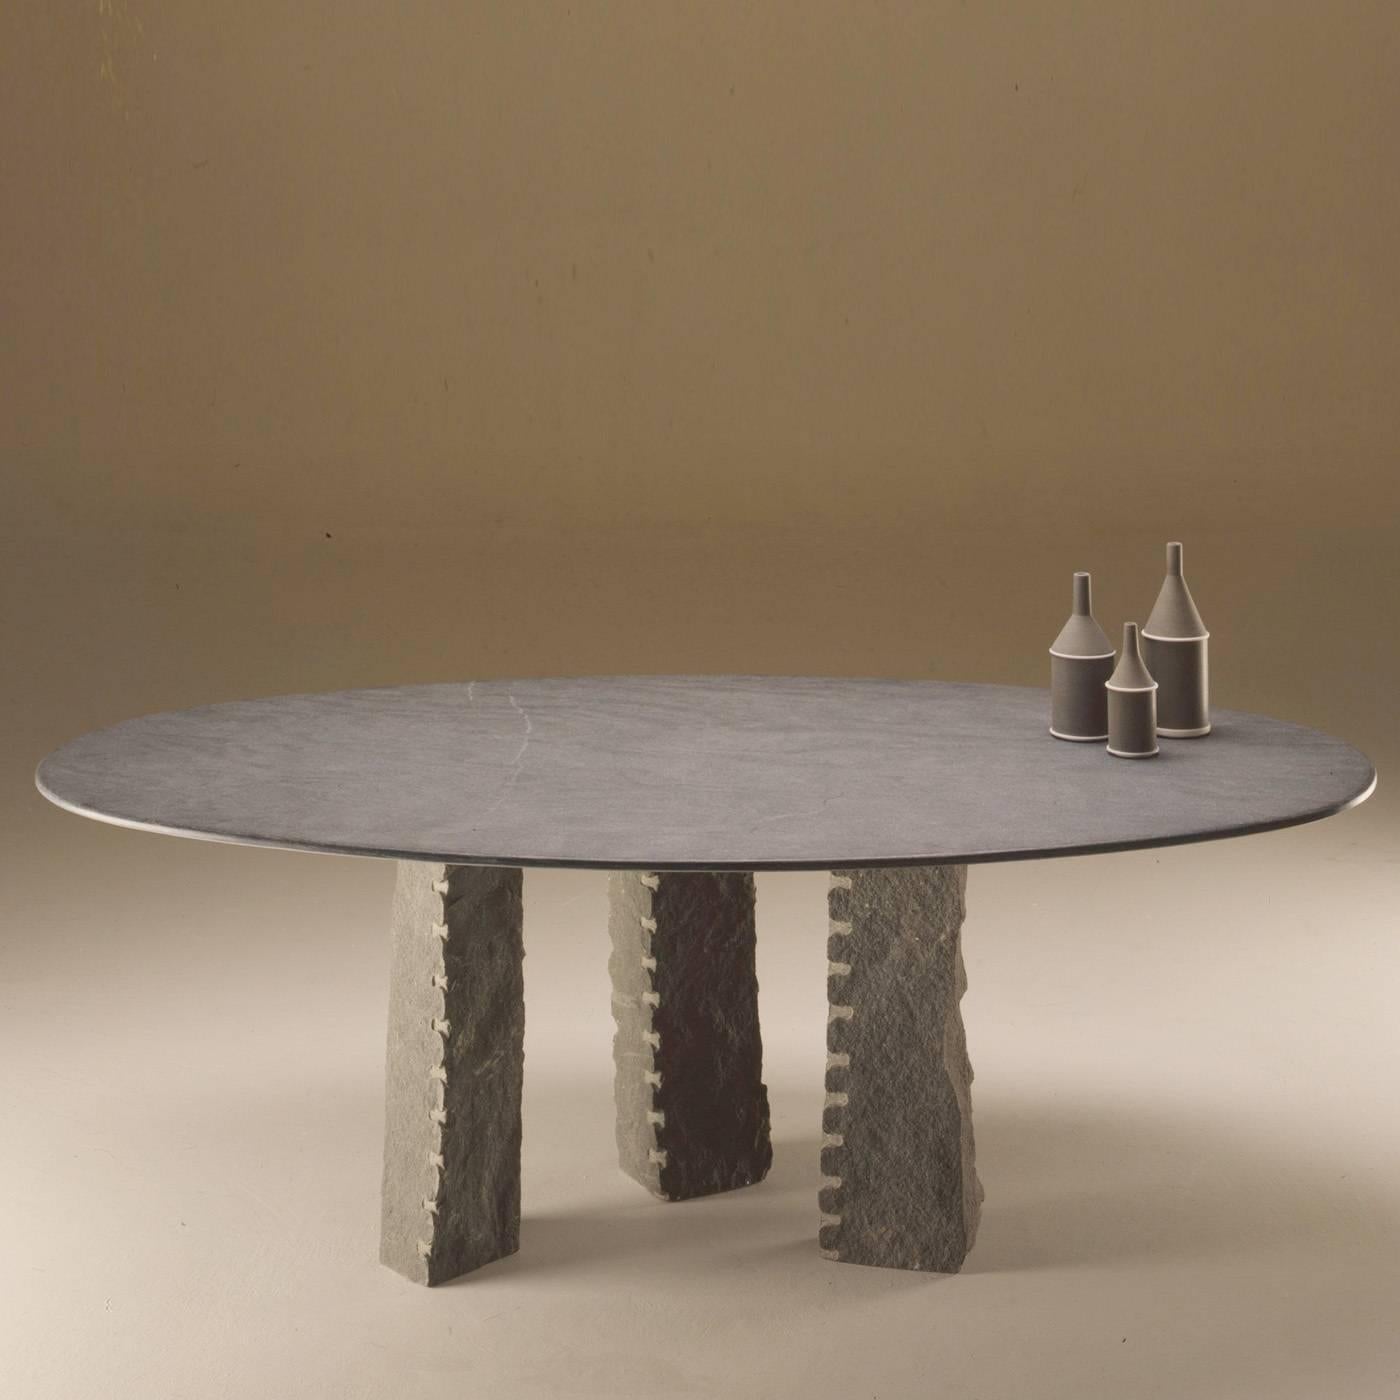 This powerful, impressive table features sandstone hand-sculpted and chiselled legs and an oval tabletop made of polished diorite. The legs are removable. The entire table is gray.